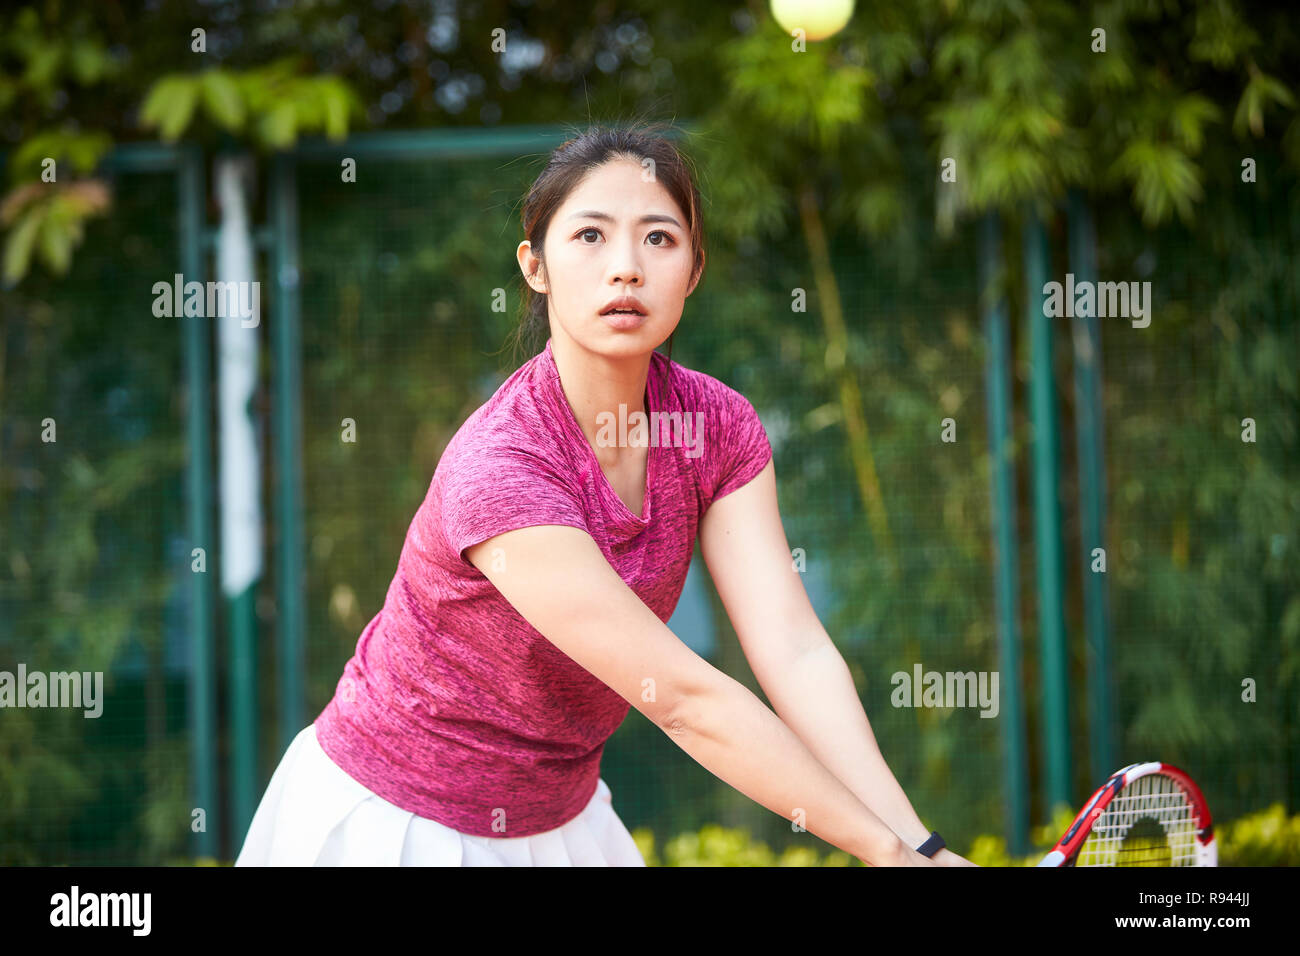 young asian woman female tennis player hitting ball with backhand Stock Photo